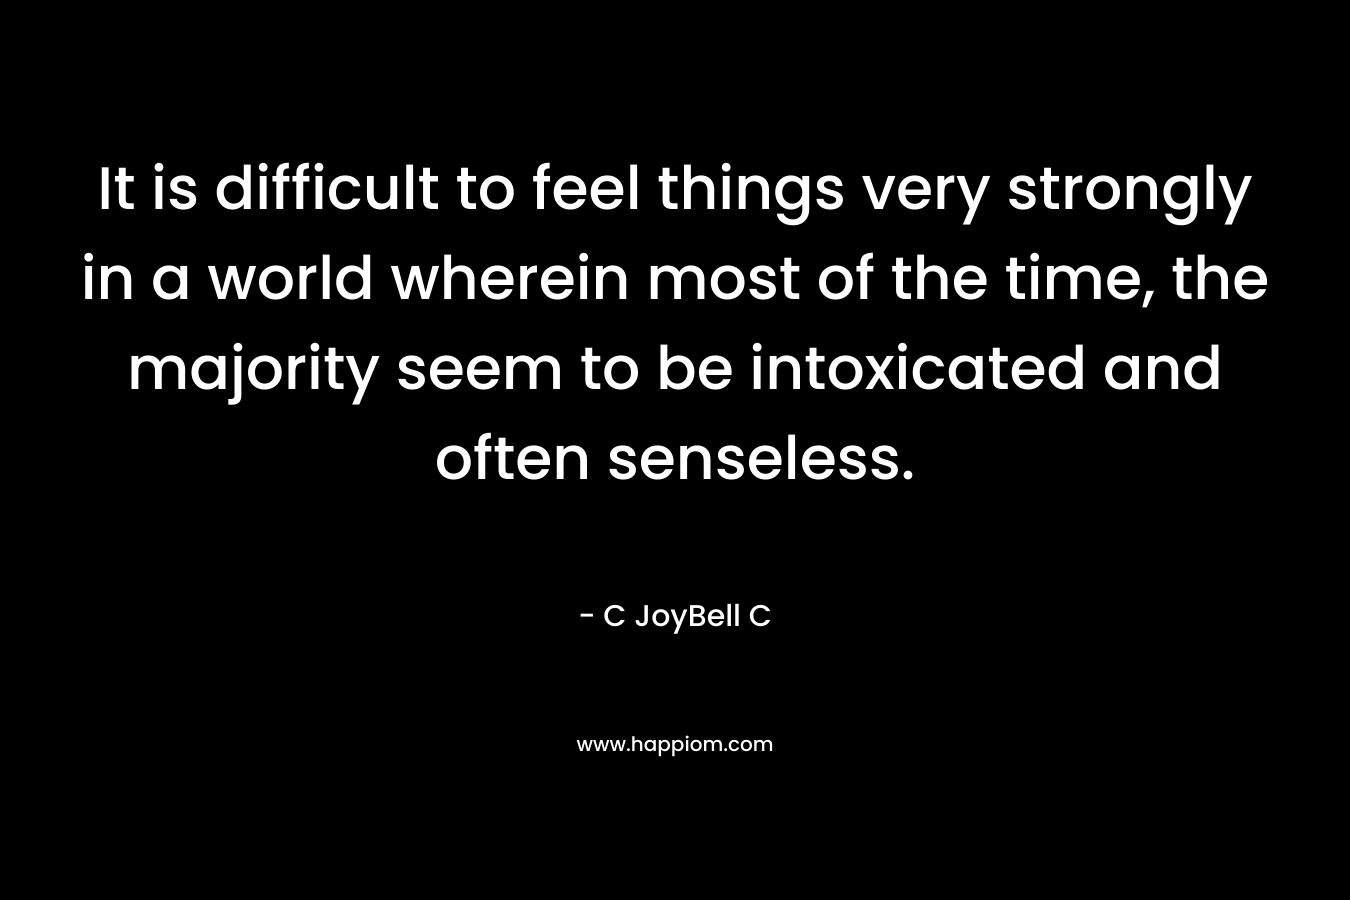 It is difficult to feel things very strongly in a world wherein most of the time, the majority seem to be intoxicated and often senseless. – C JoyBell C